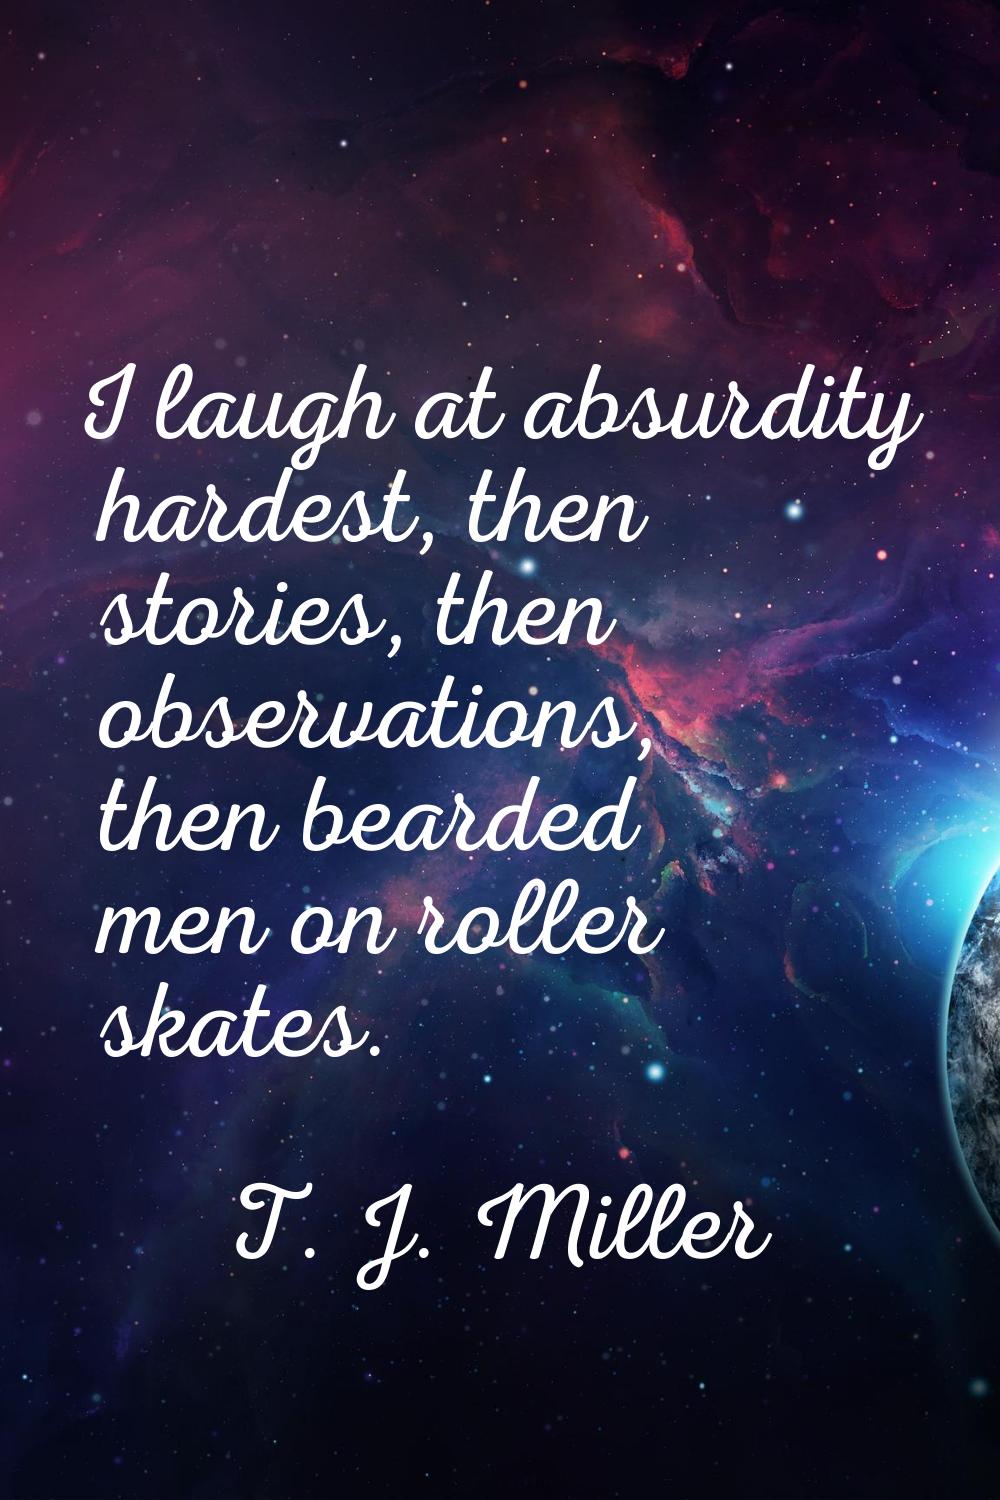 I laugh at absurdity hardest, then stories, then observations, then bearded men on roller skates.